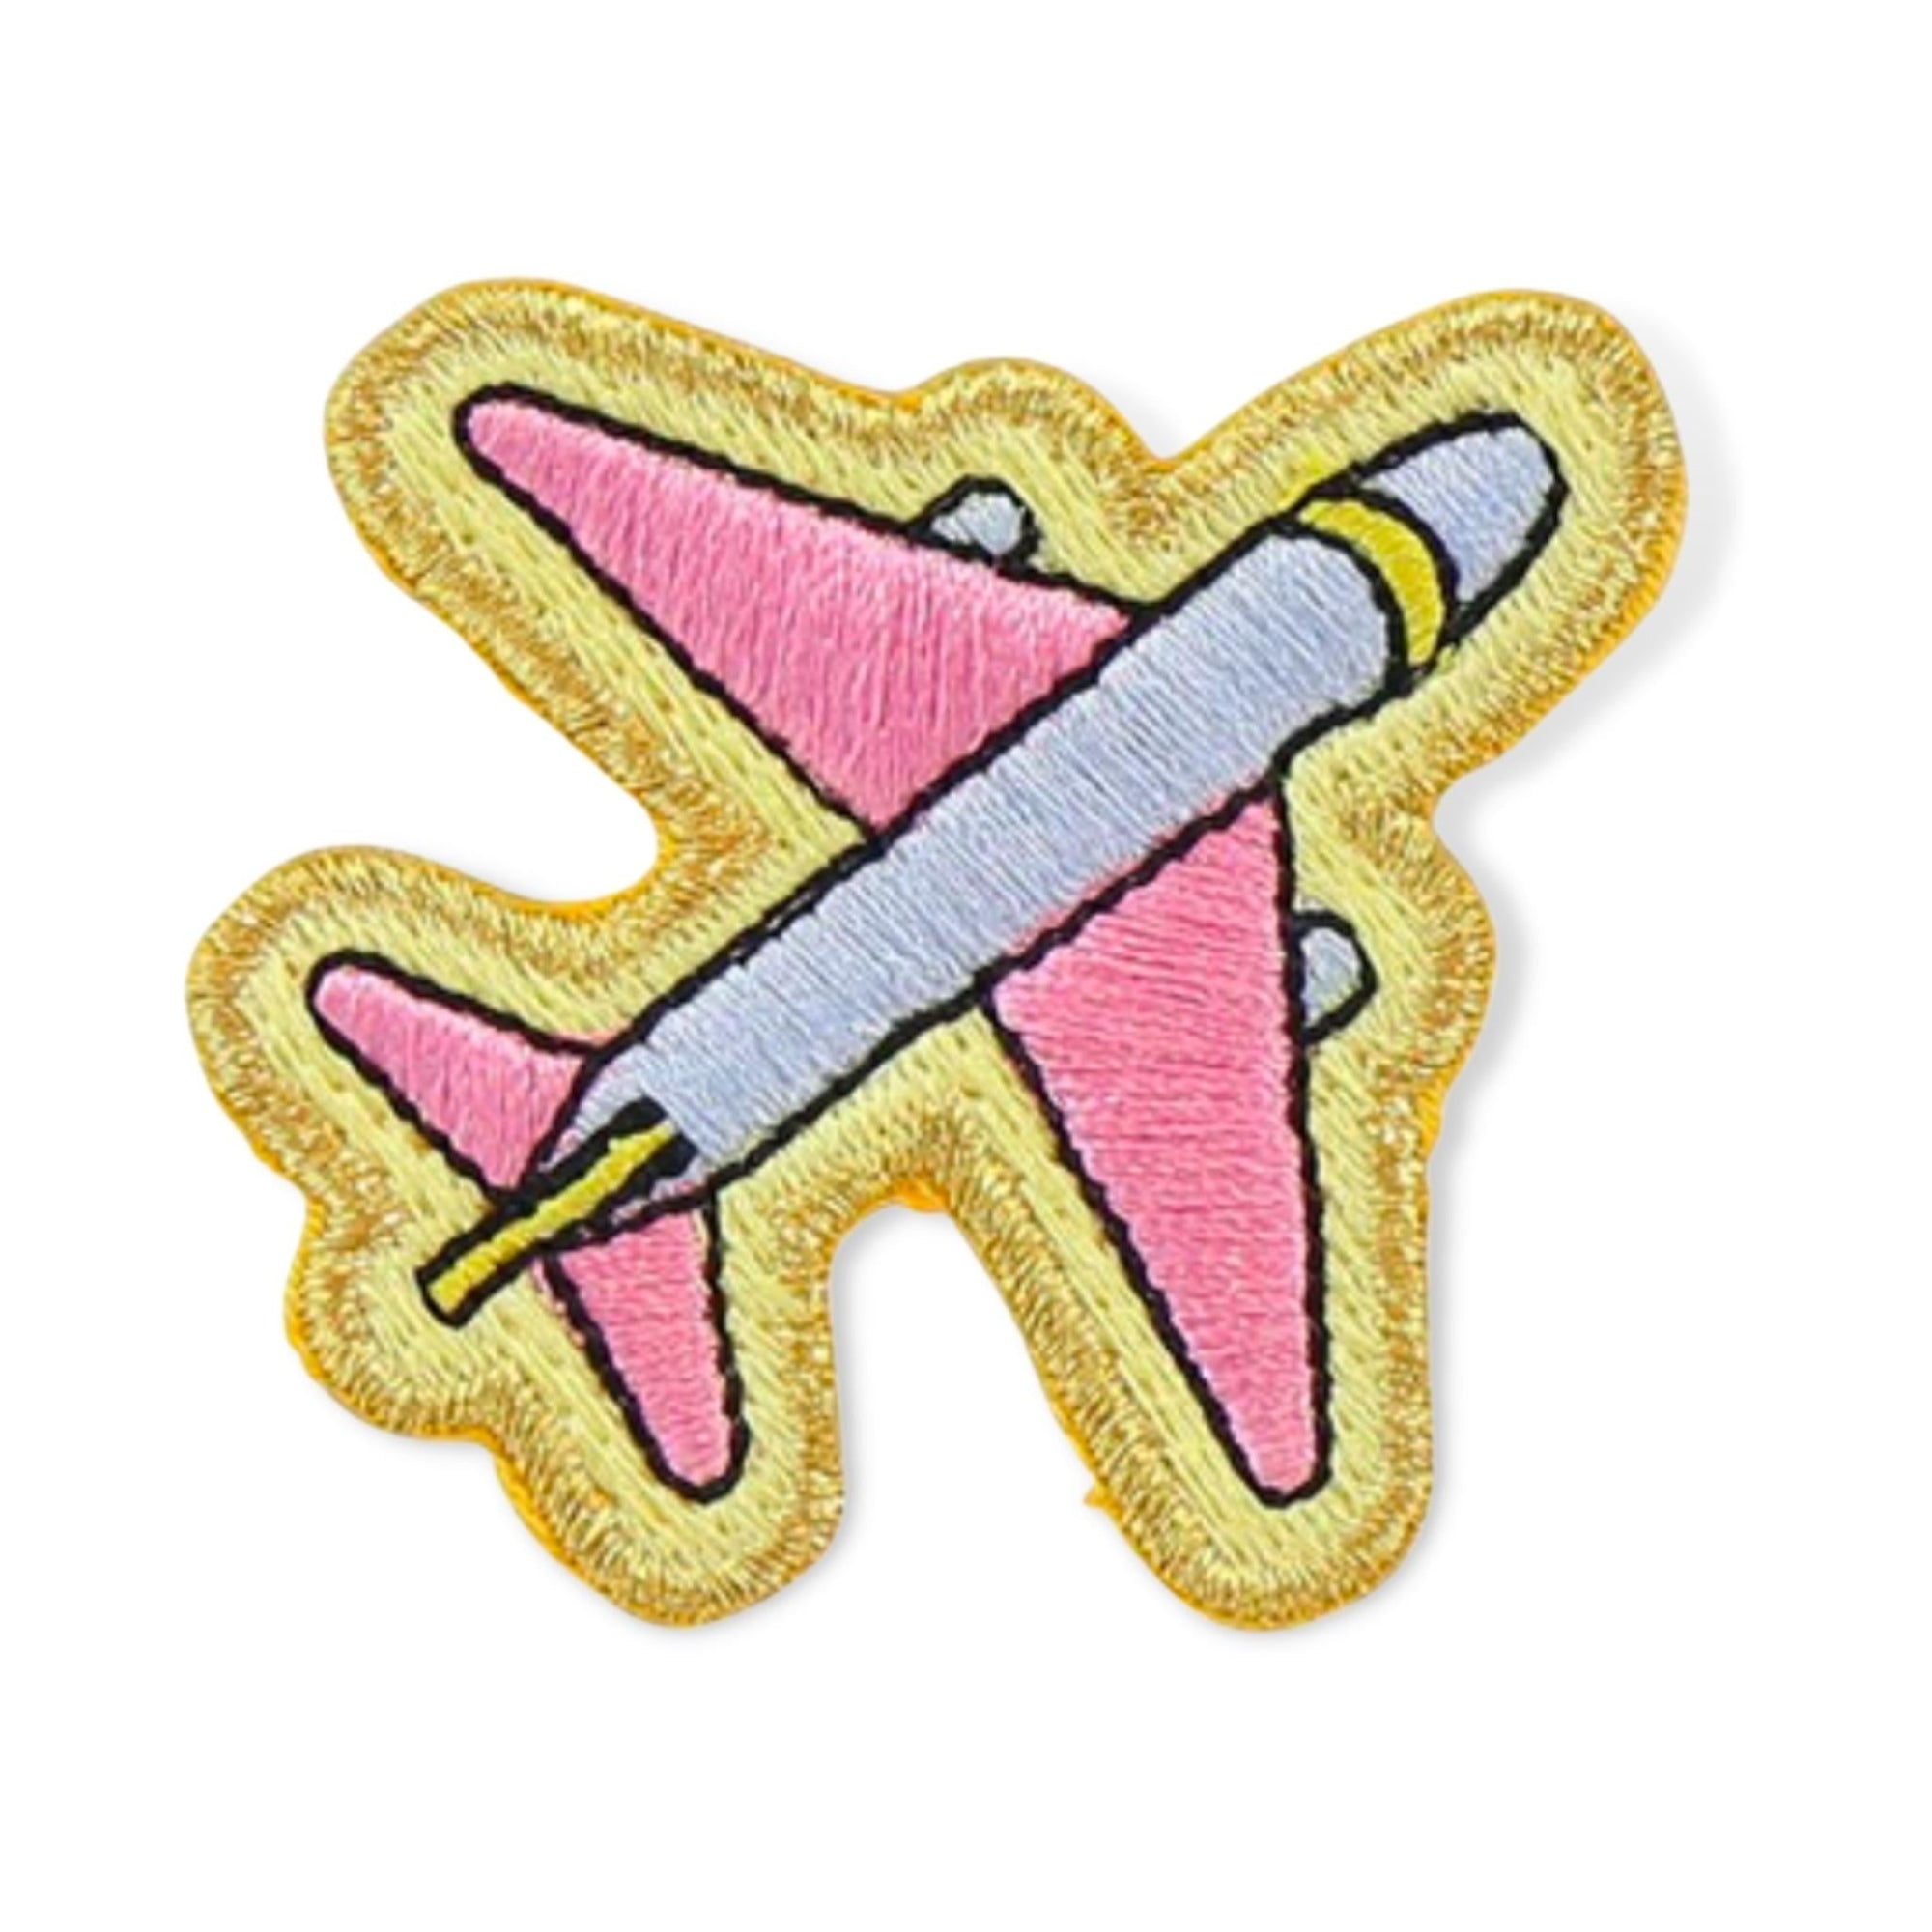 SCLN Airplane Travel Patches 2 - a Spirit Animal - Patches active Aug 2022 Clover gifts